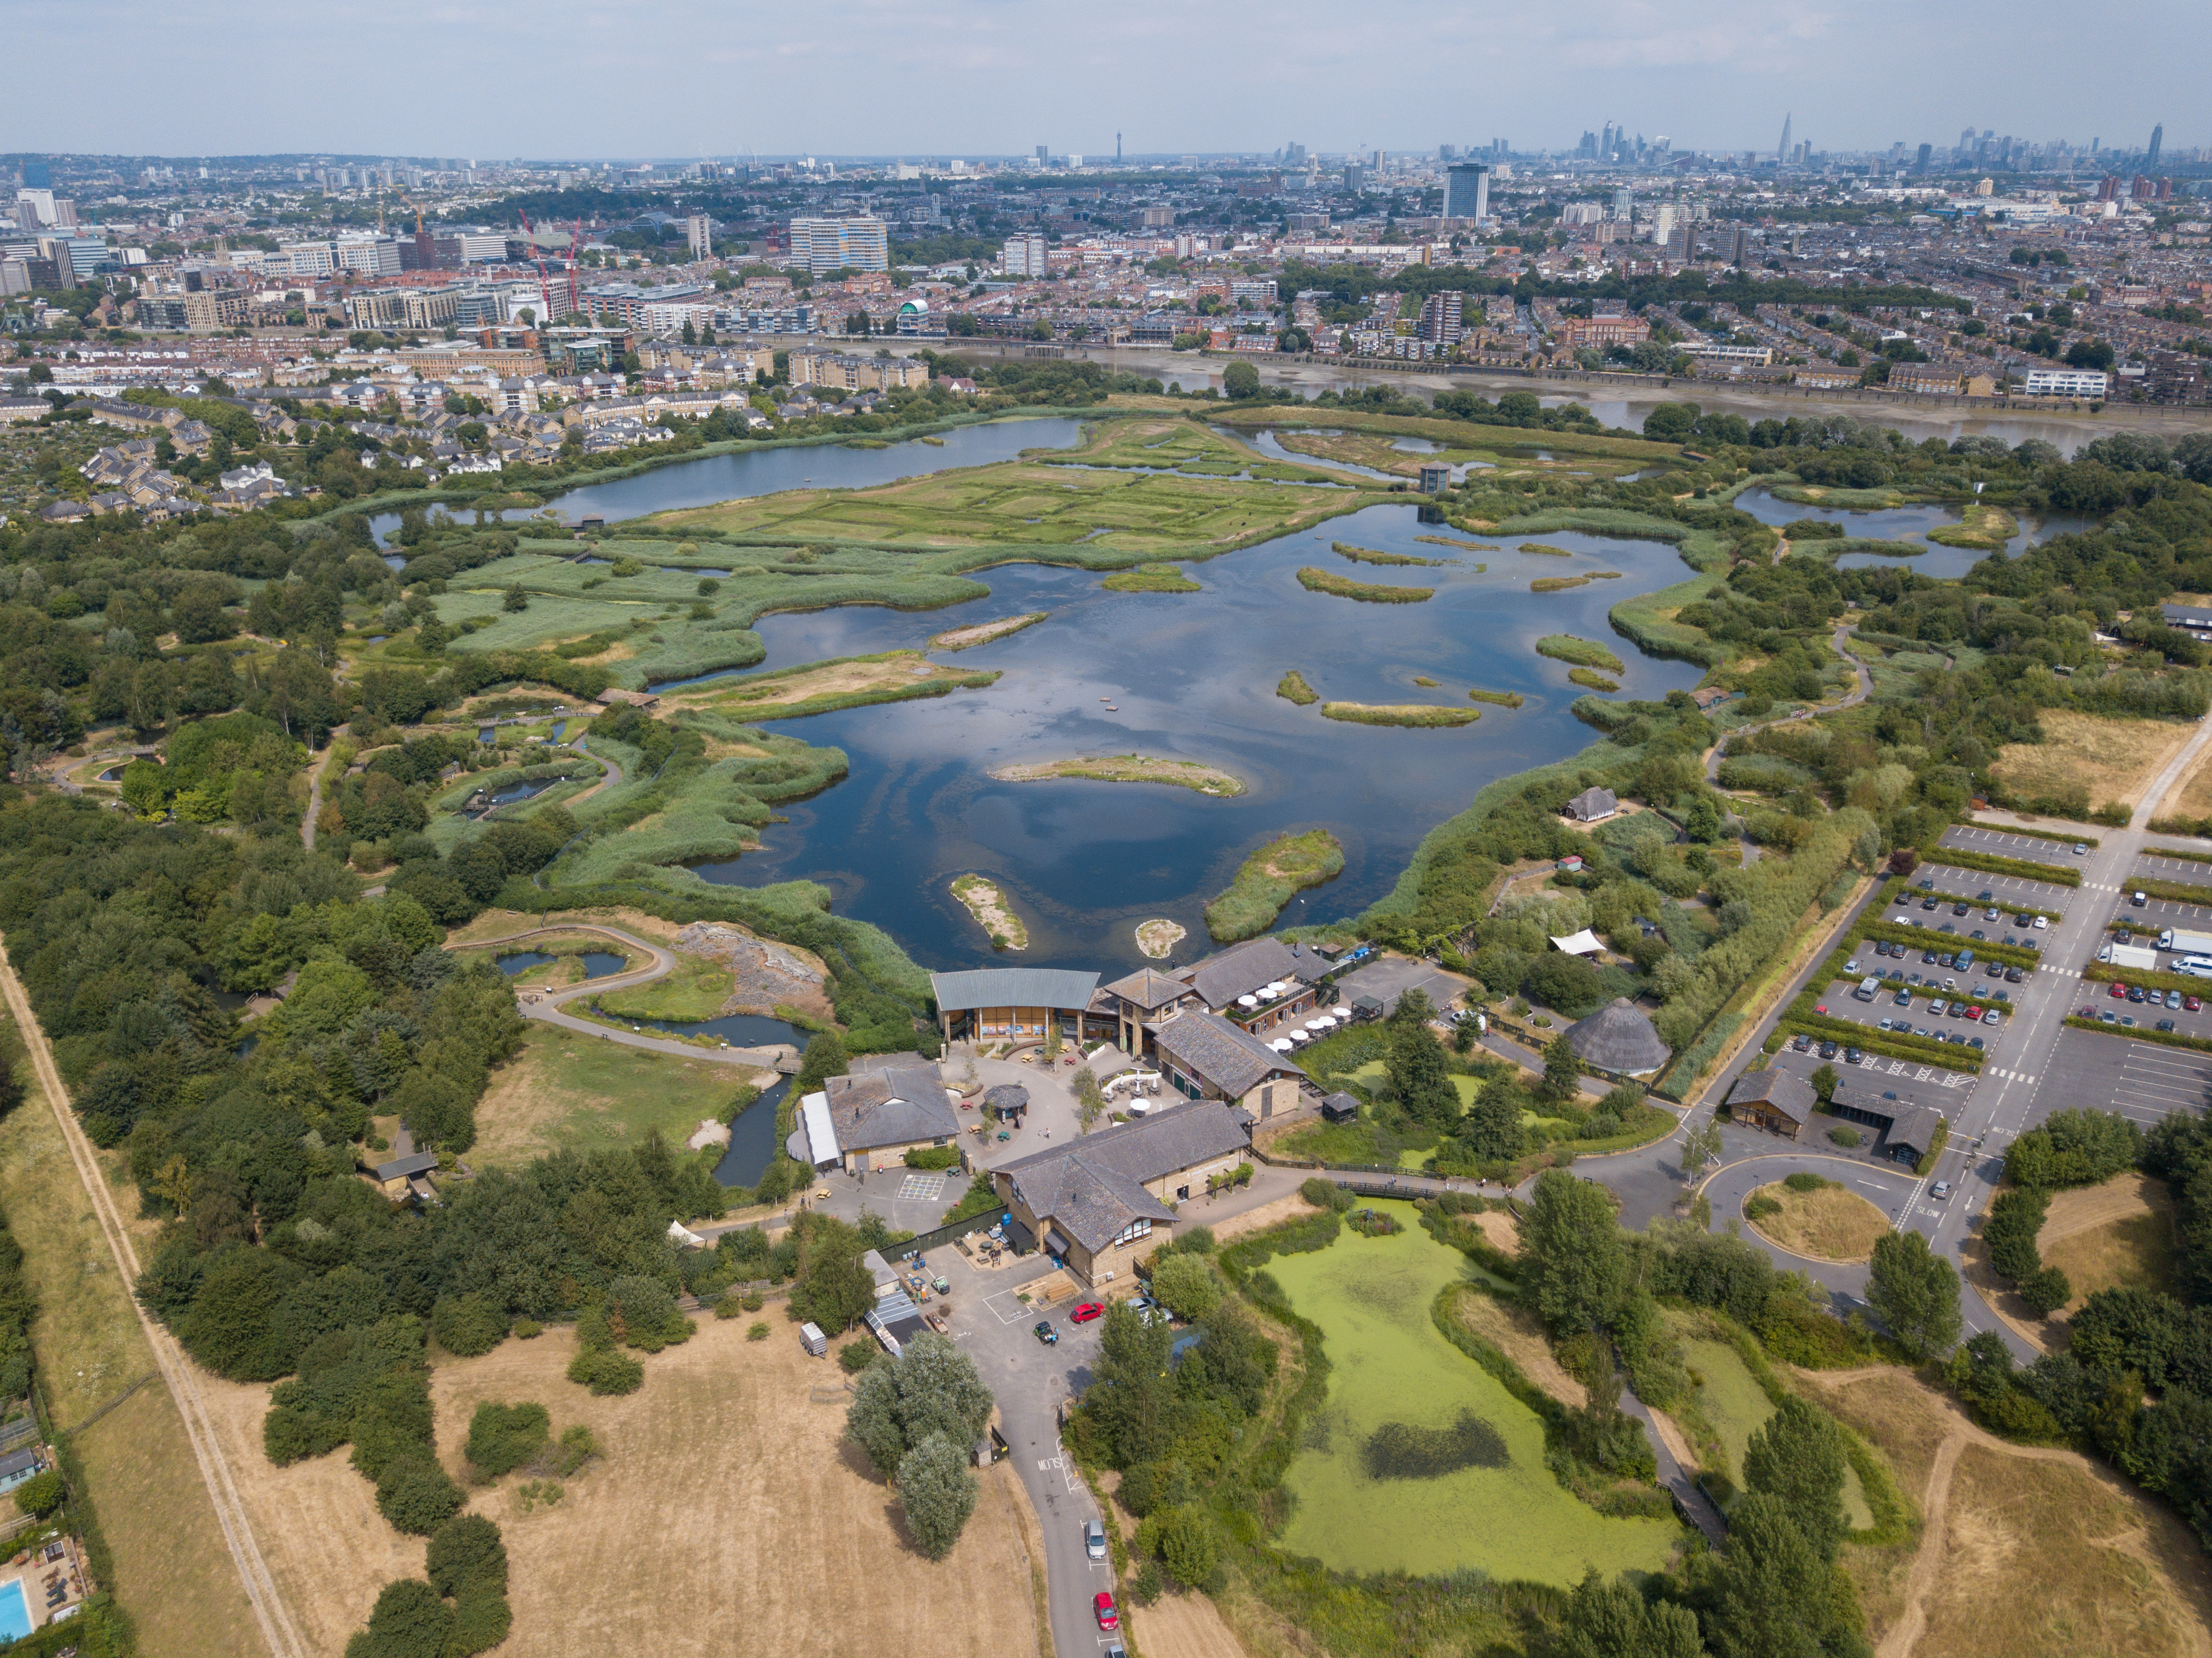 WWT London Wetland Centre at Barnes from above (WWT/PA)